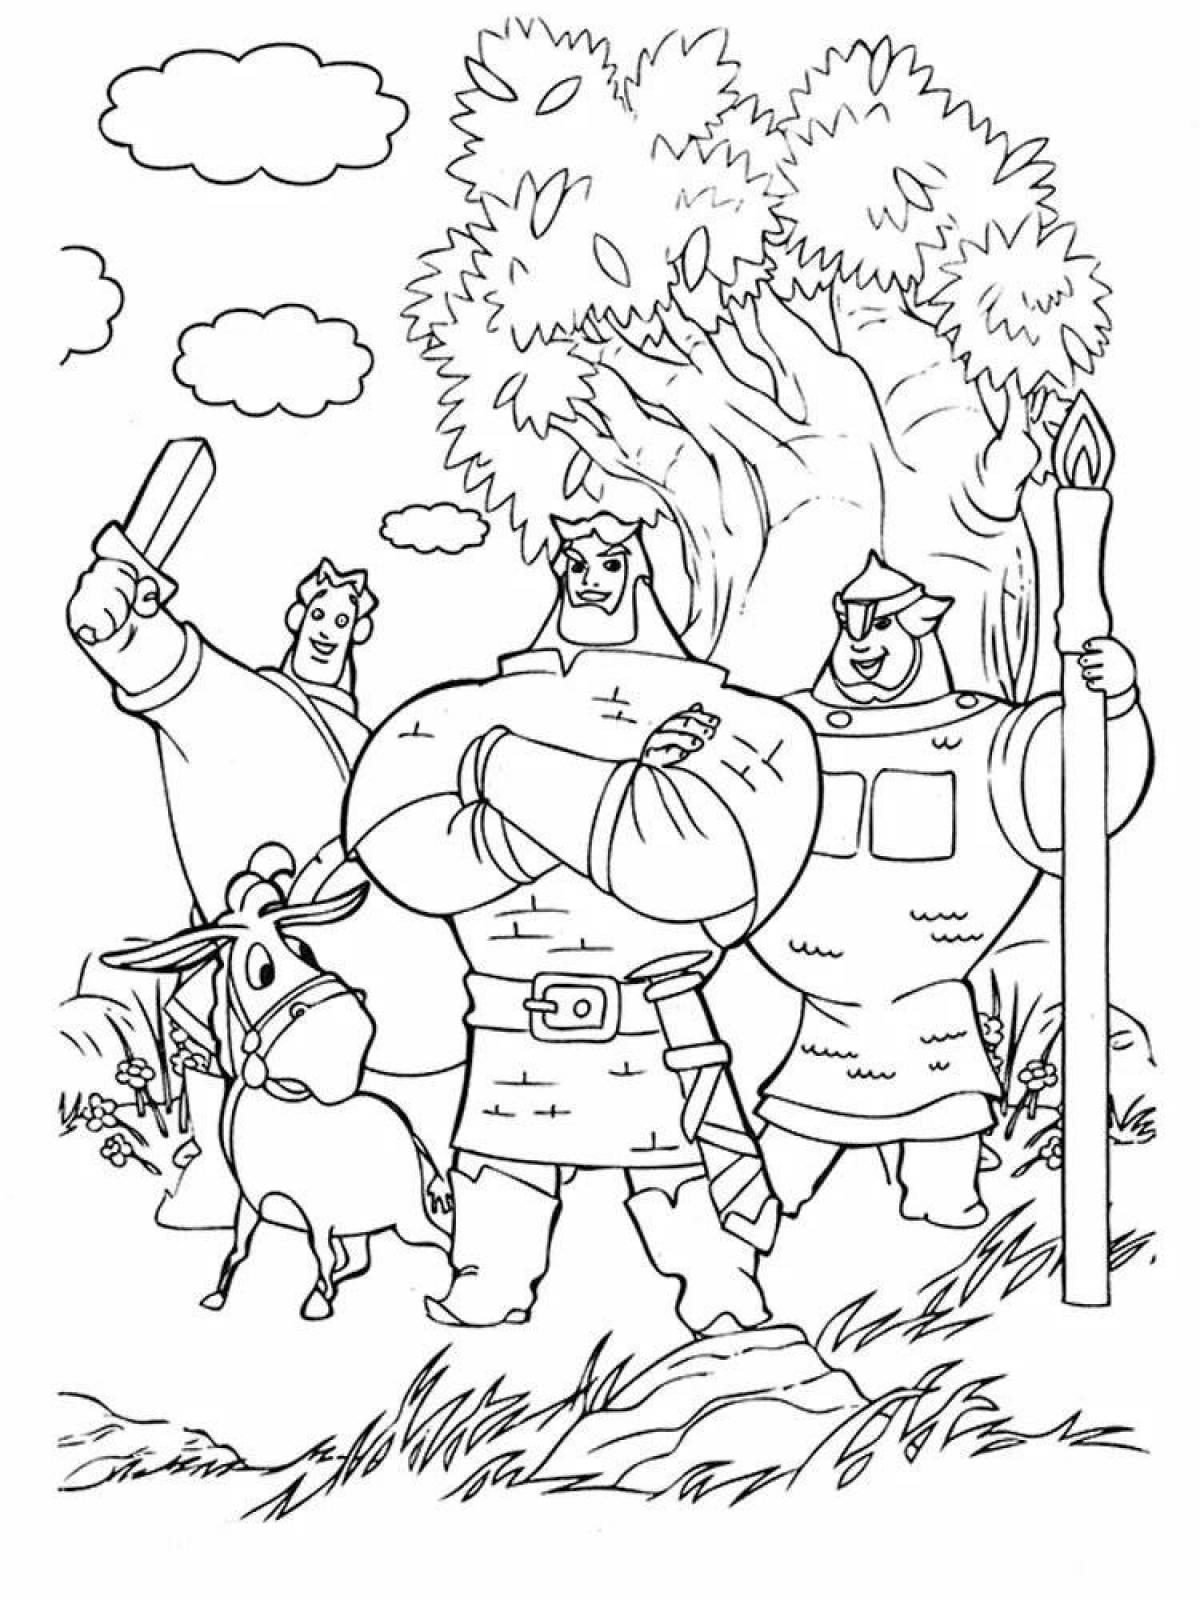 Live coloring page 3 heroes